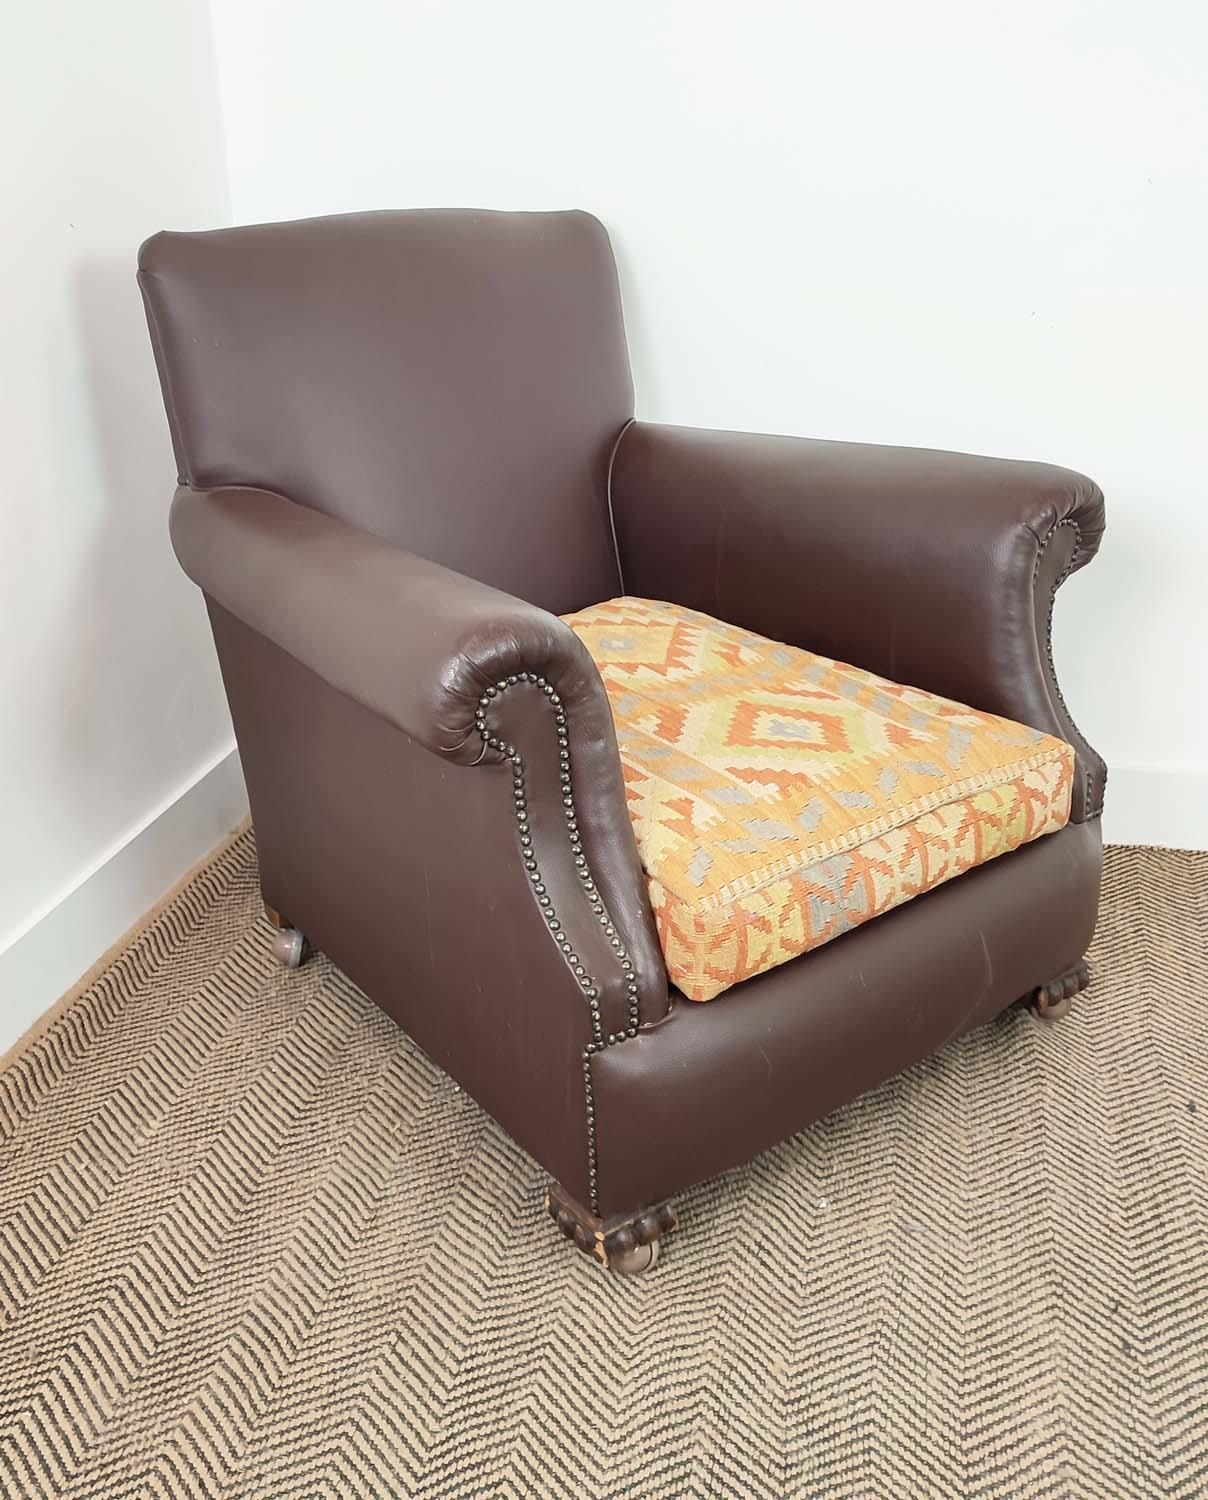 CLUB ARMCHAIR, early 20th century oak in brown leatherette with kilim seat cushion and modern - Image 2 of 14